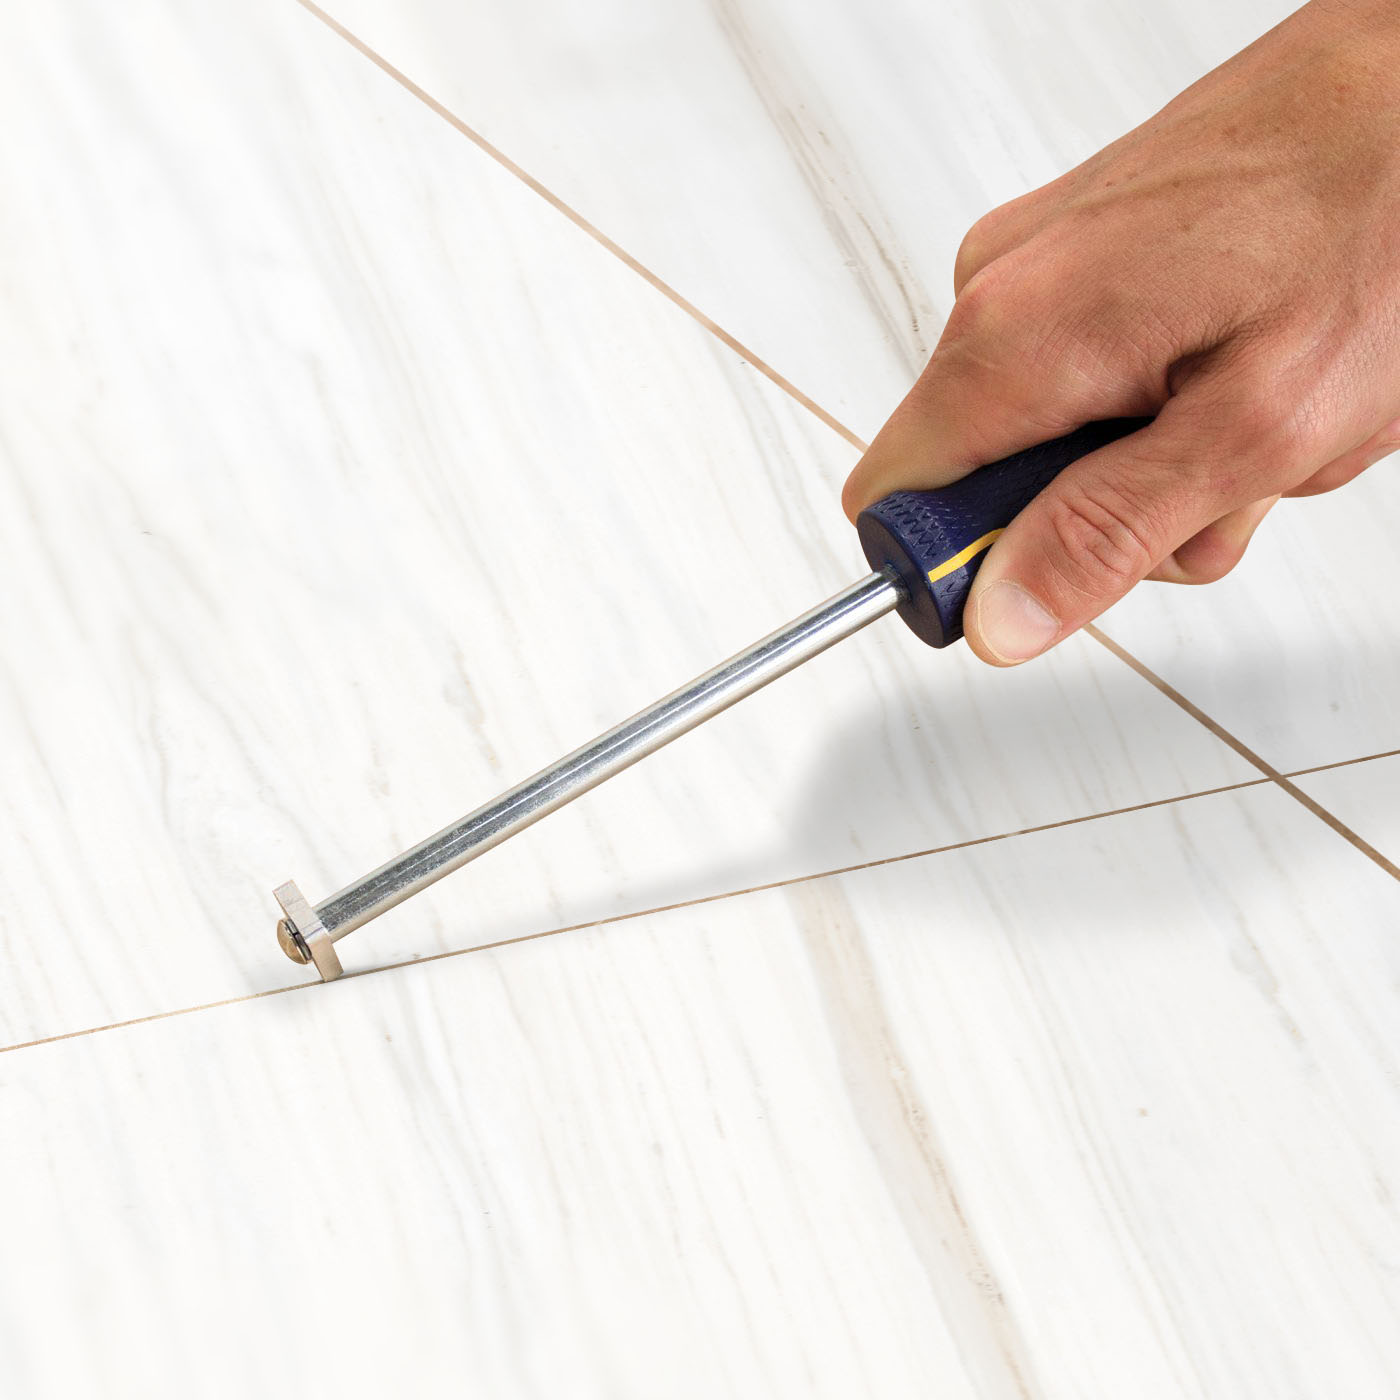 How To Clean Porcelain Tiles